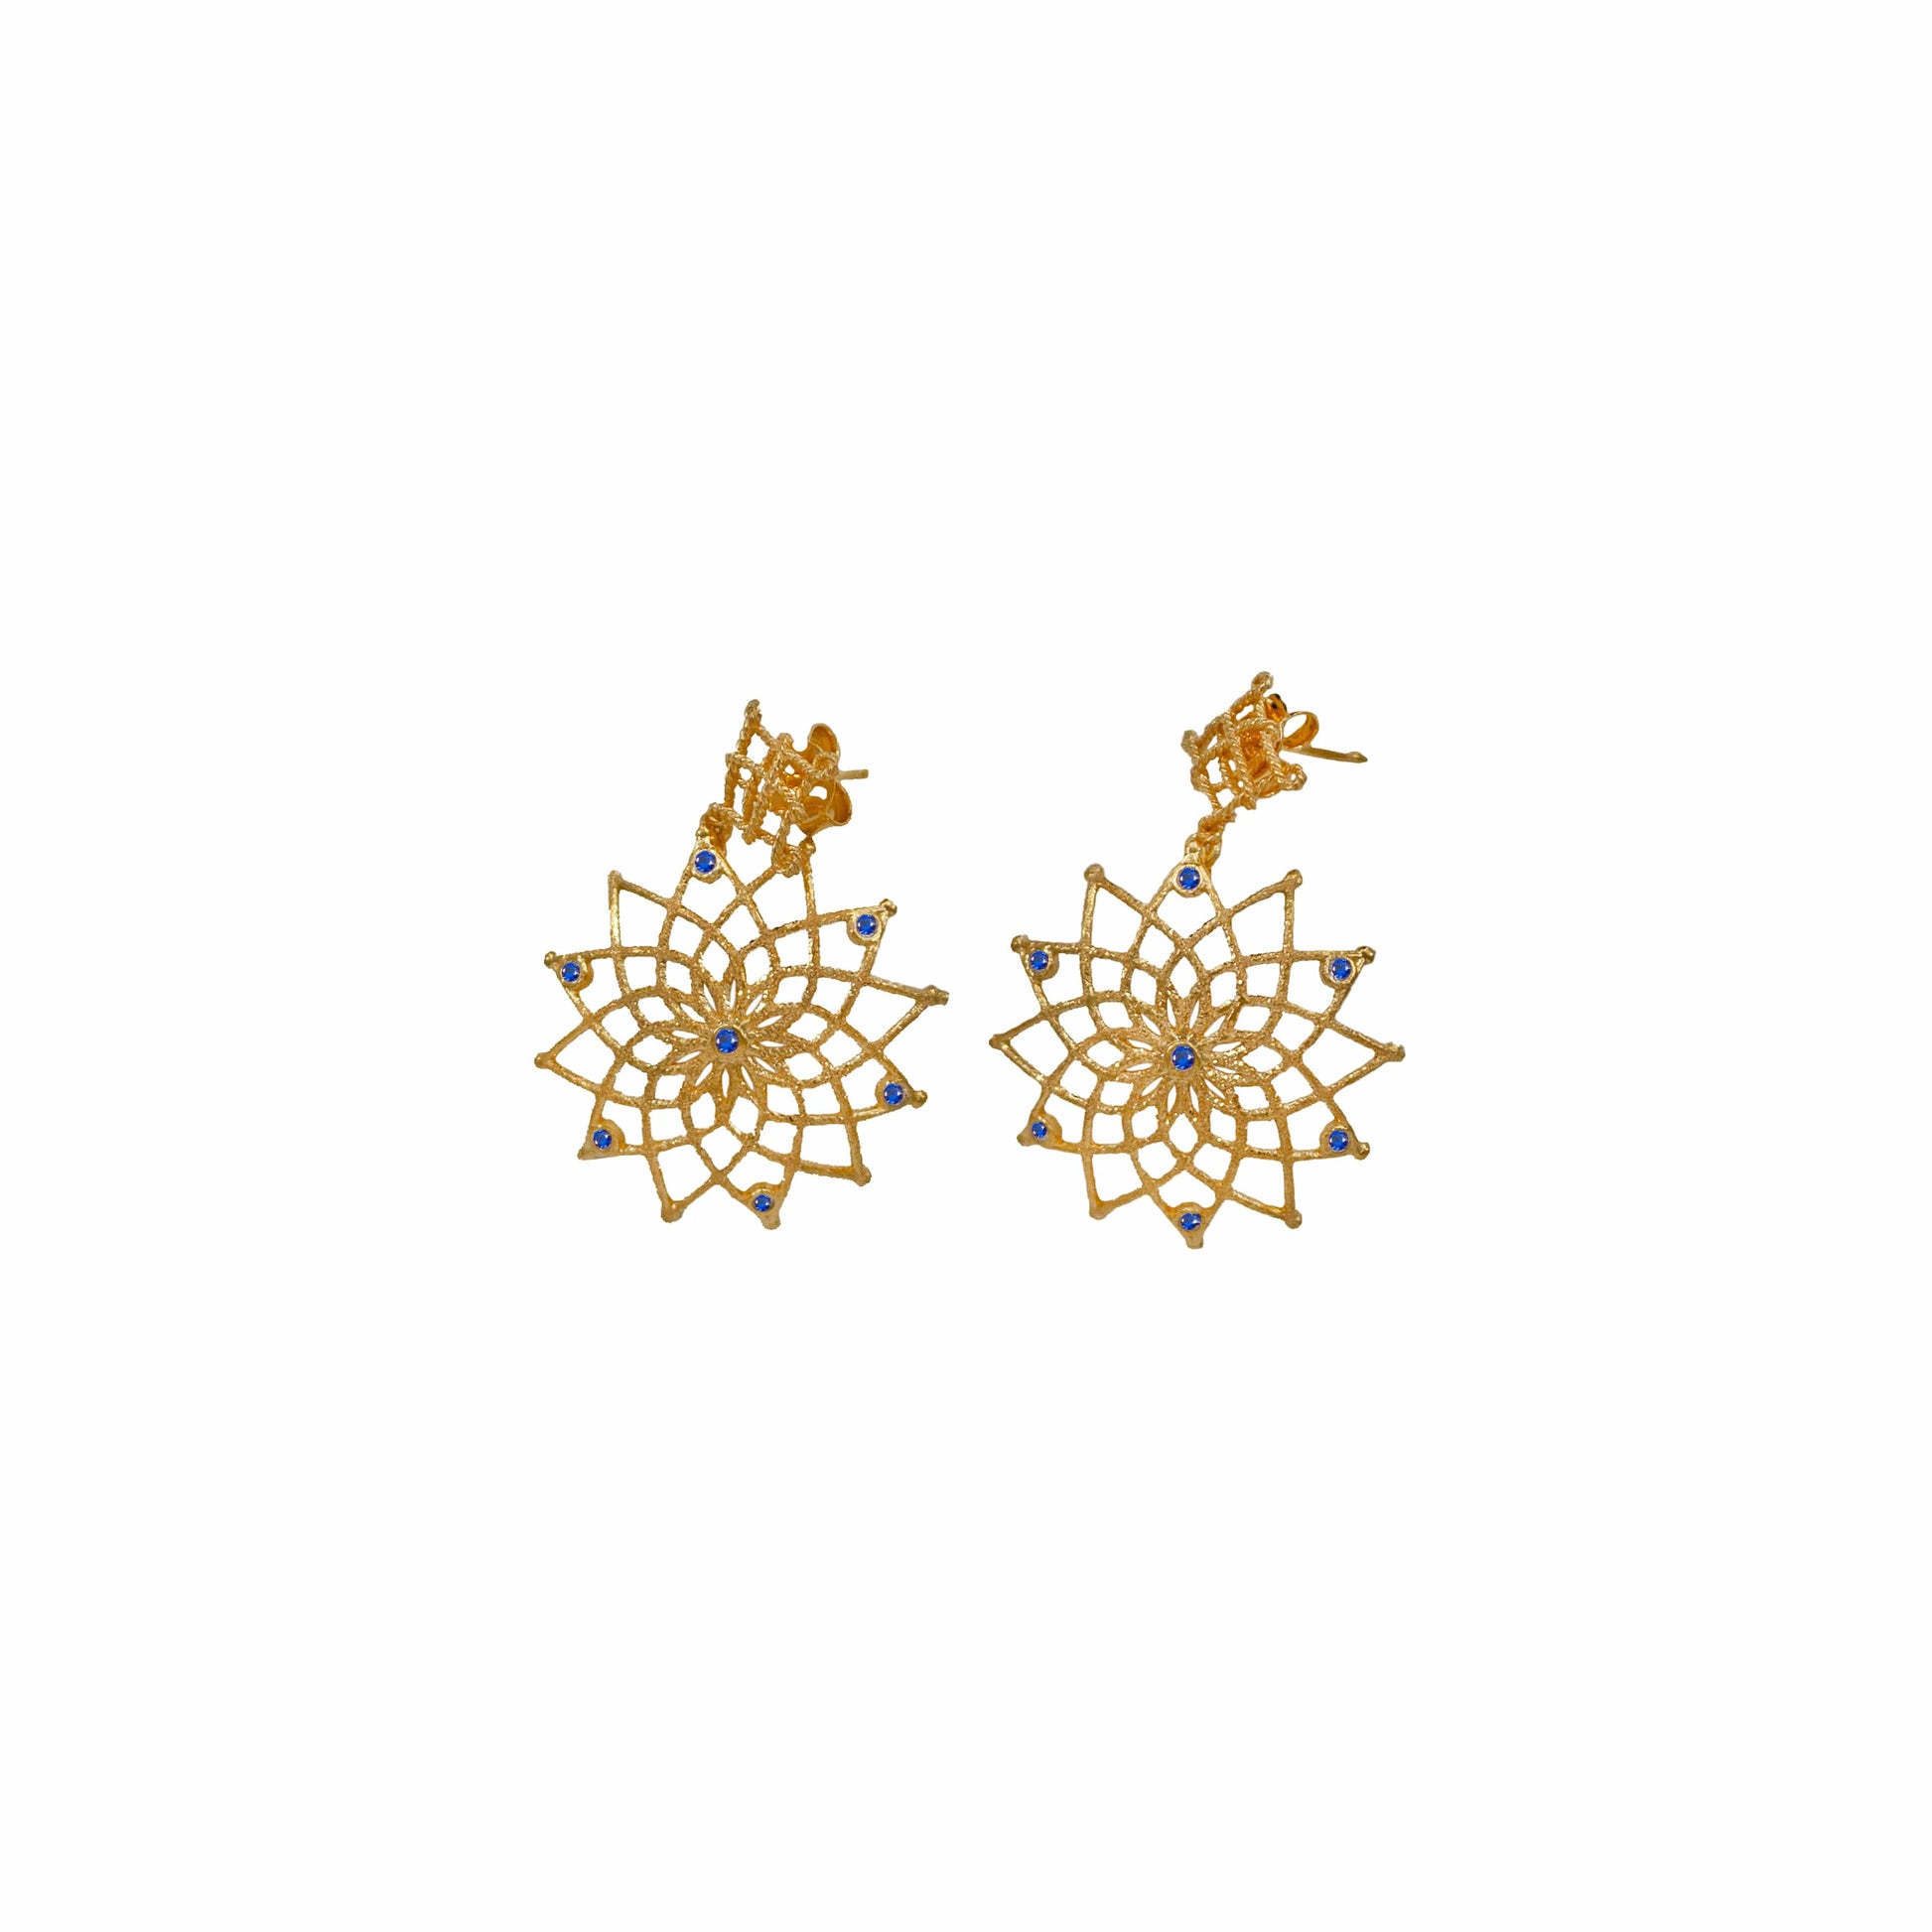 MONDO CATTOLICO 35 mm Gold Plated Caput Mundi Earrings Blue Crystals